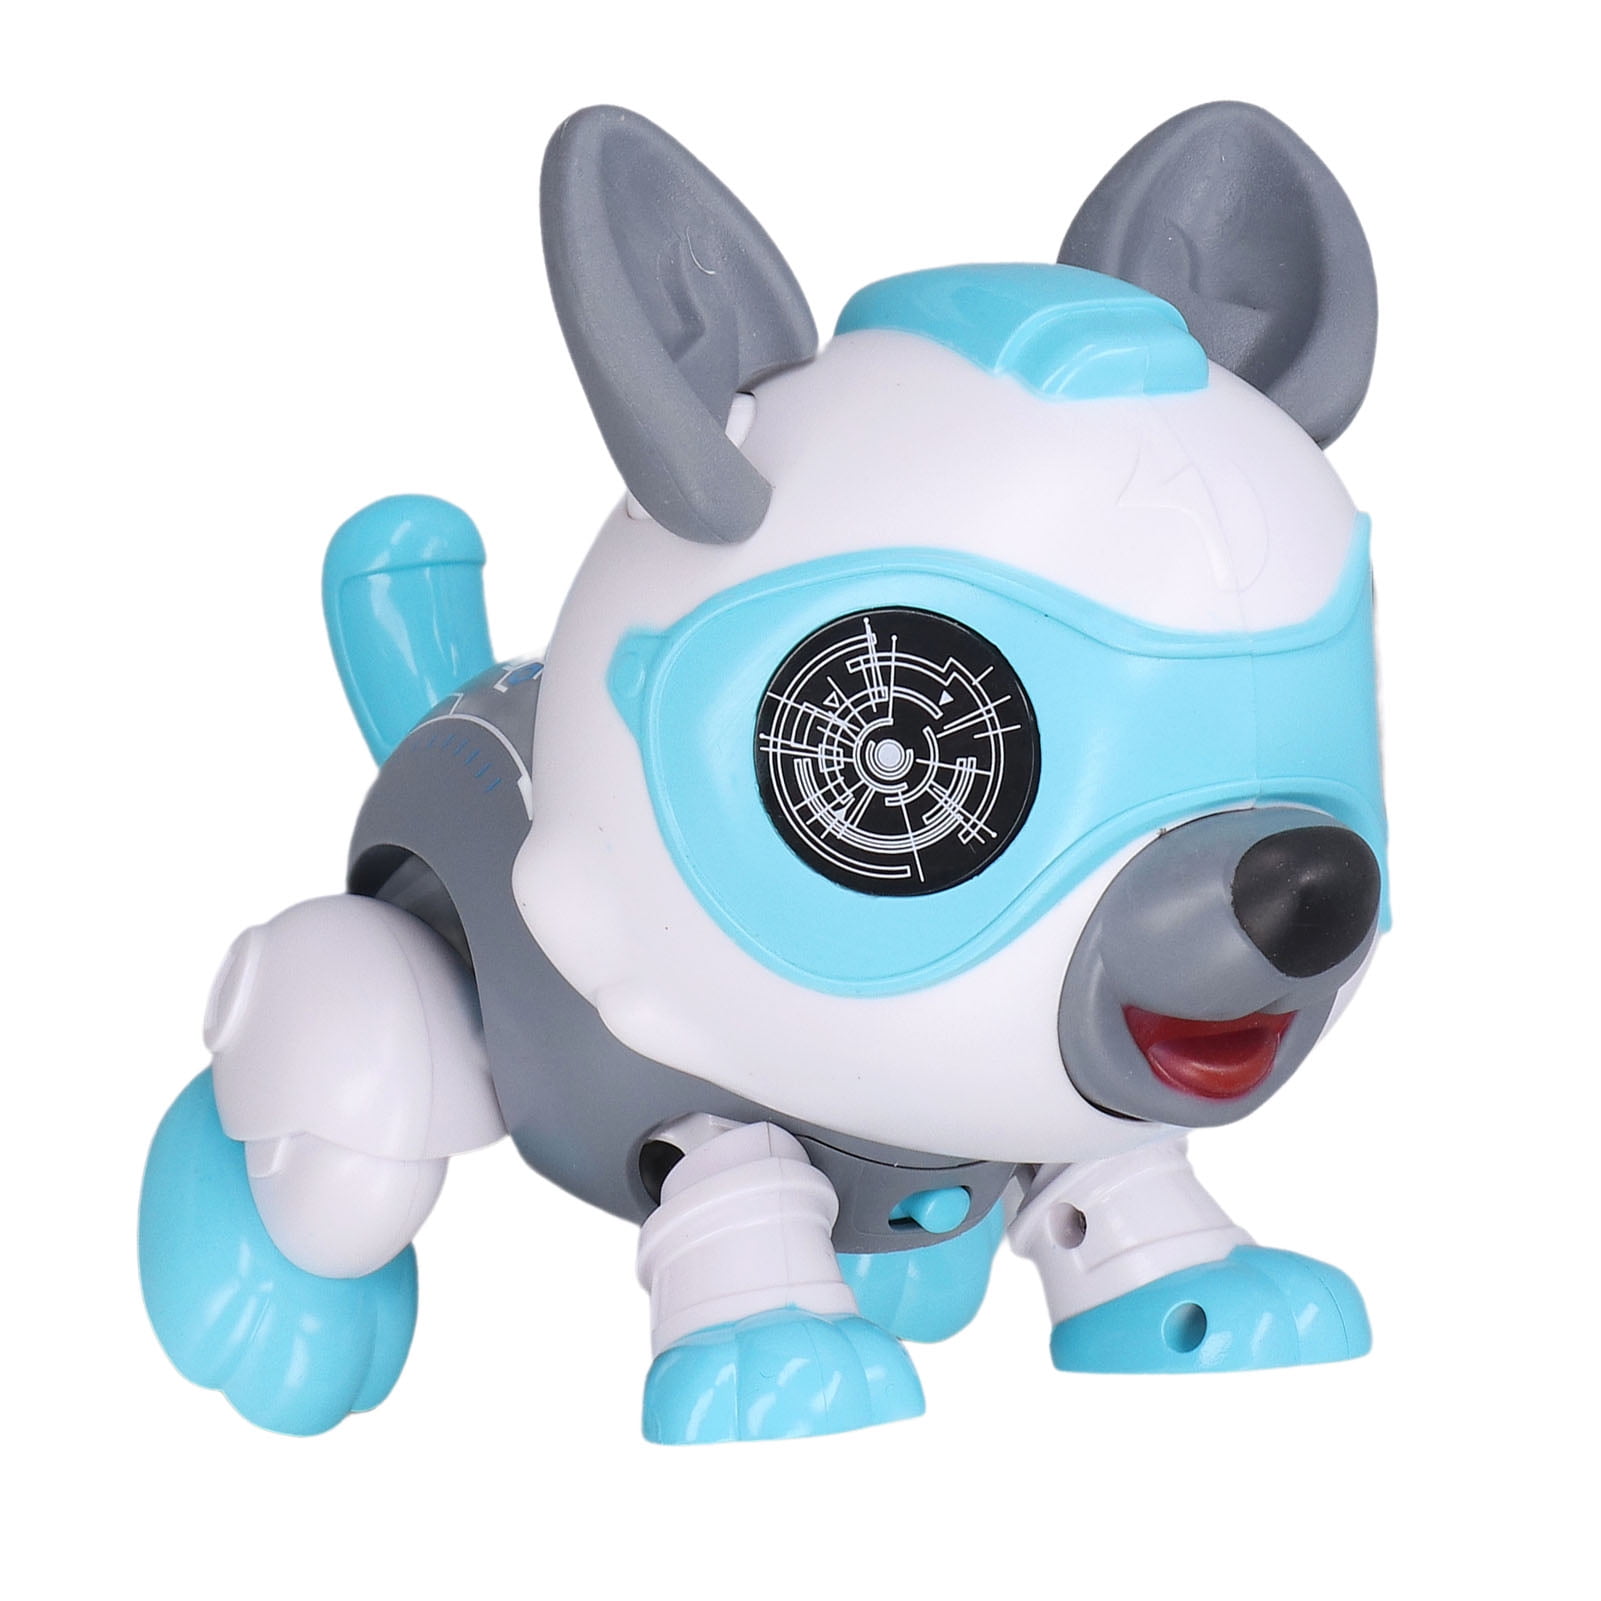 industri hundrede Korrekt Robot Pet Dogs, Gift Smart Remote Control Robotic Dog Voice Controlled For  Kids For Daily Playing - Walmart.com